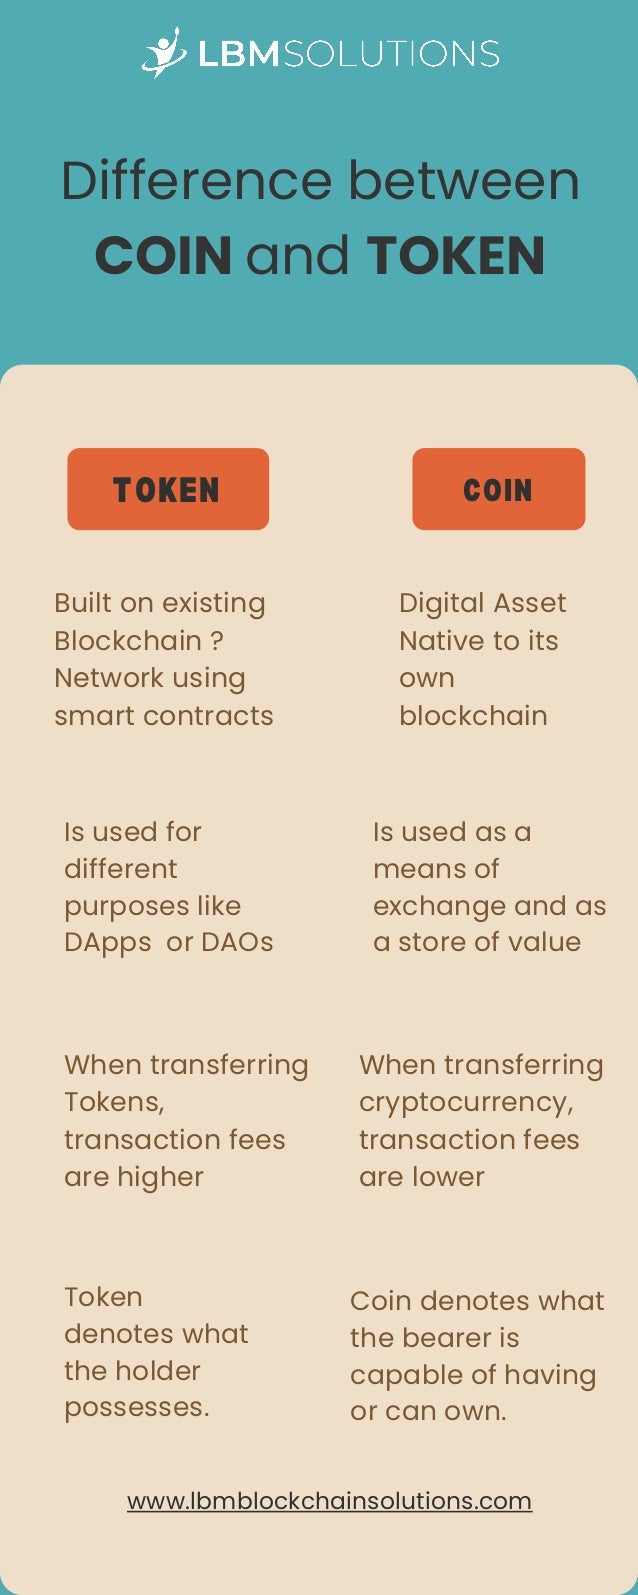 Difference between

COIN and TOKEN
TOKEN COIN
Built on existing

Blockchain ?

Network using

smart contracts
Is used for

different

purposes like

DApps or DAOs
When transferring

cryptocurrency,

transaction fees

are lower
Token

denotes what

the holder

possesses.
Digital Asset

Native to its

own

blockchain
Is used as a

means of

exchange and as

a store of value
When transferring

Tokens,

transaction fees

are higher
Coin denotes what

the bearer is

capable of having

or can own.
www.lbmblockchainsolutions.com
 